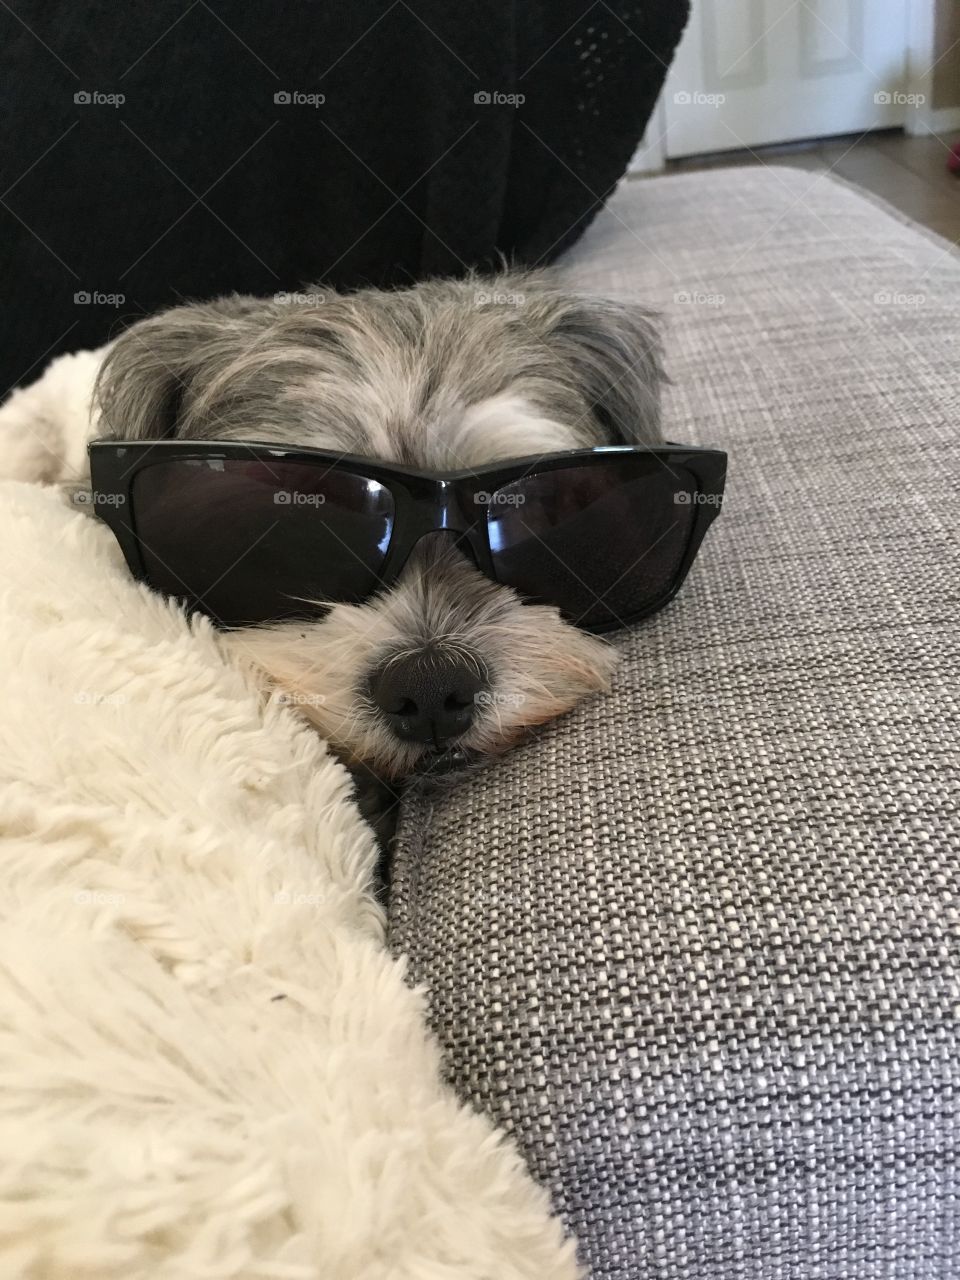 Too cool for school 